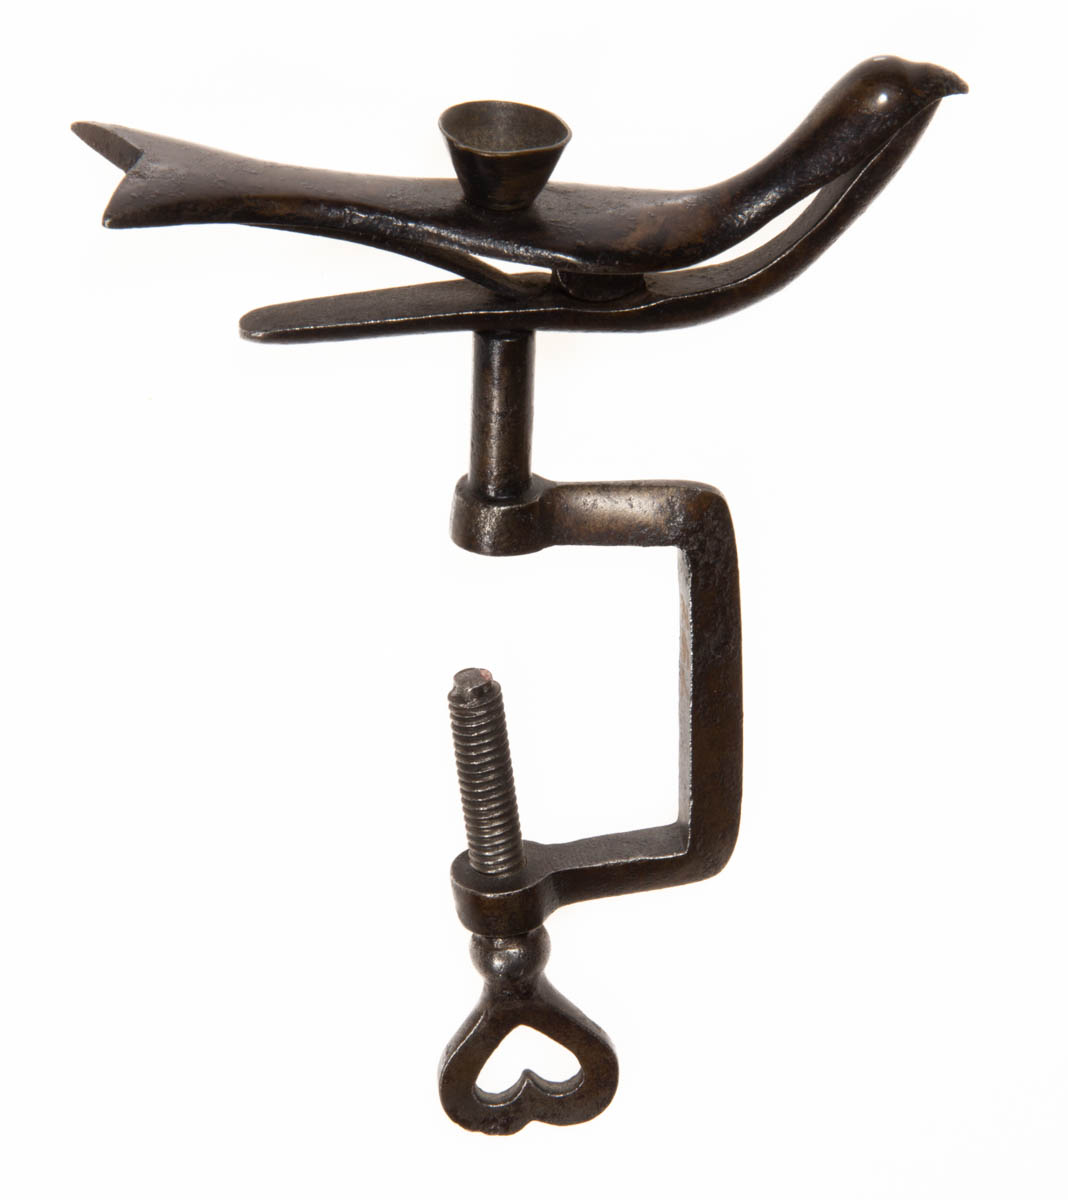 CAST-IRON FIGURAL SEWING BIRD CLAMP WITH PINCUSHION HOLDER